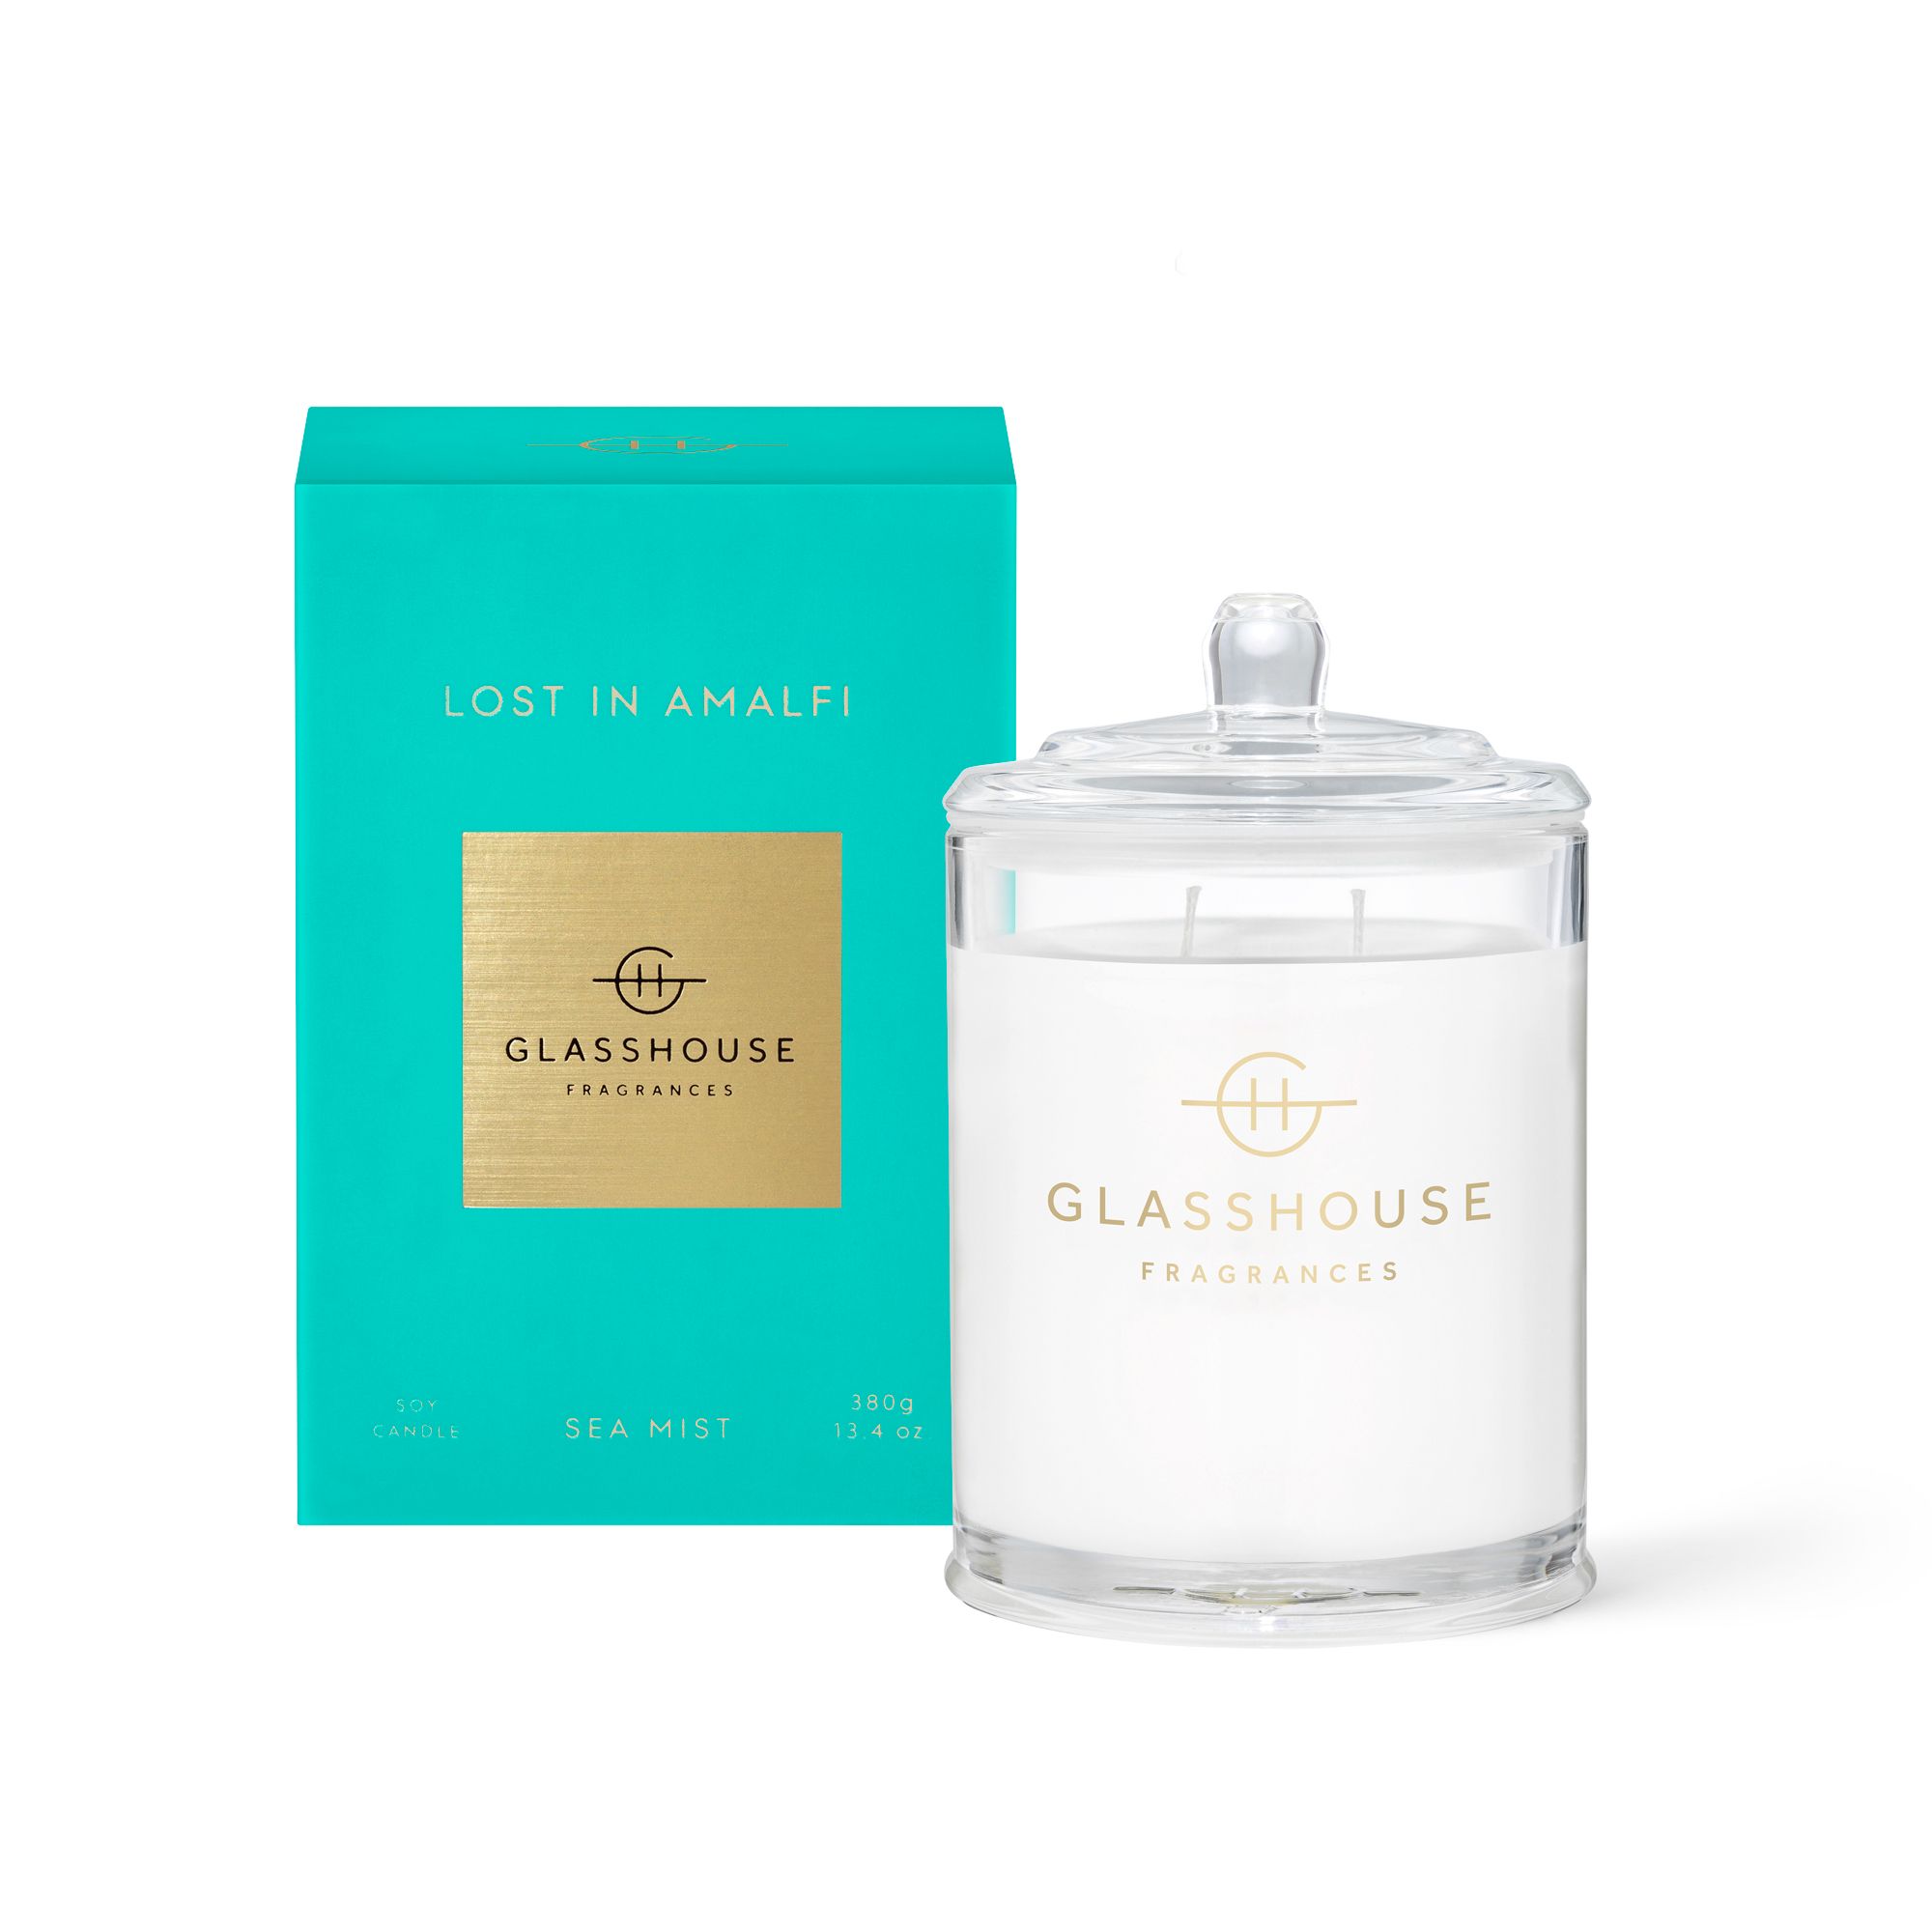  Lost in Amalfi - Sea Mist Soy Candle